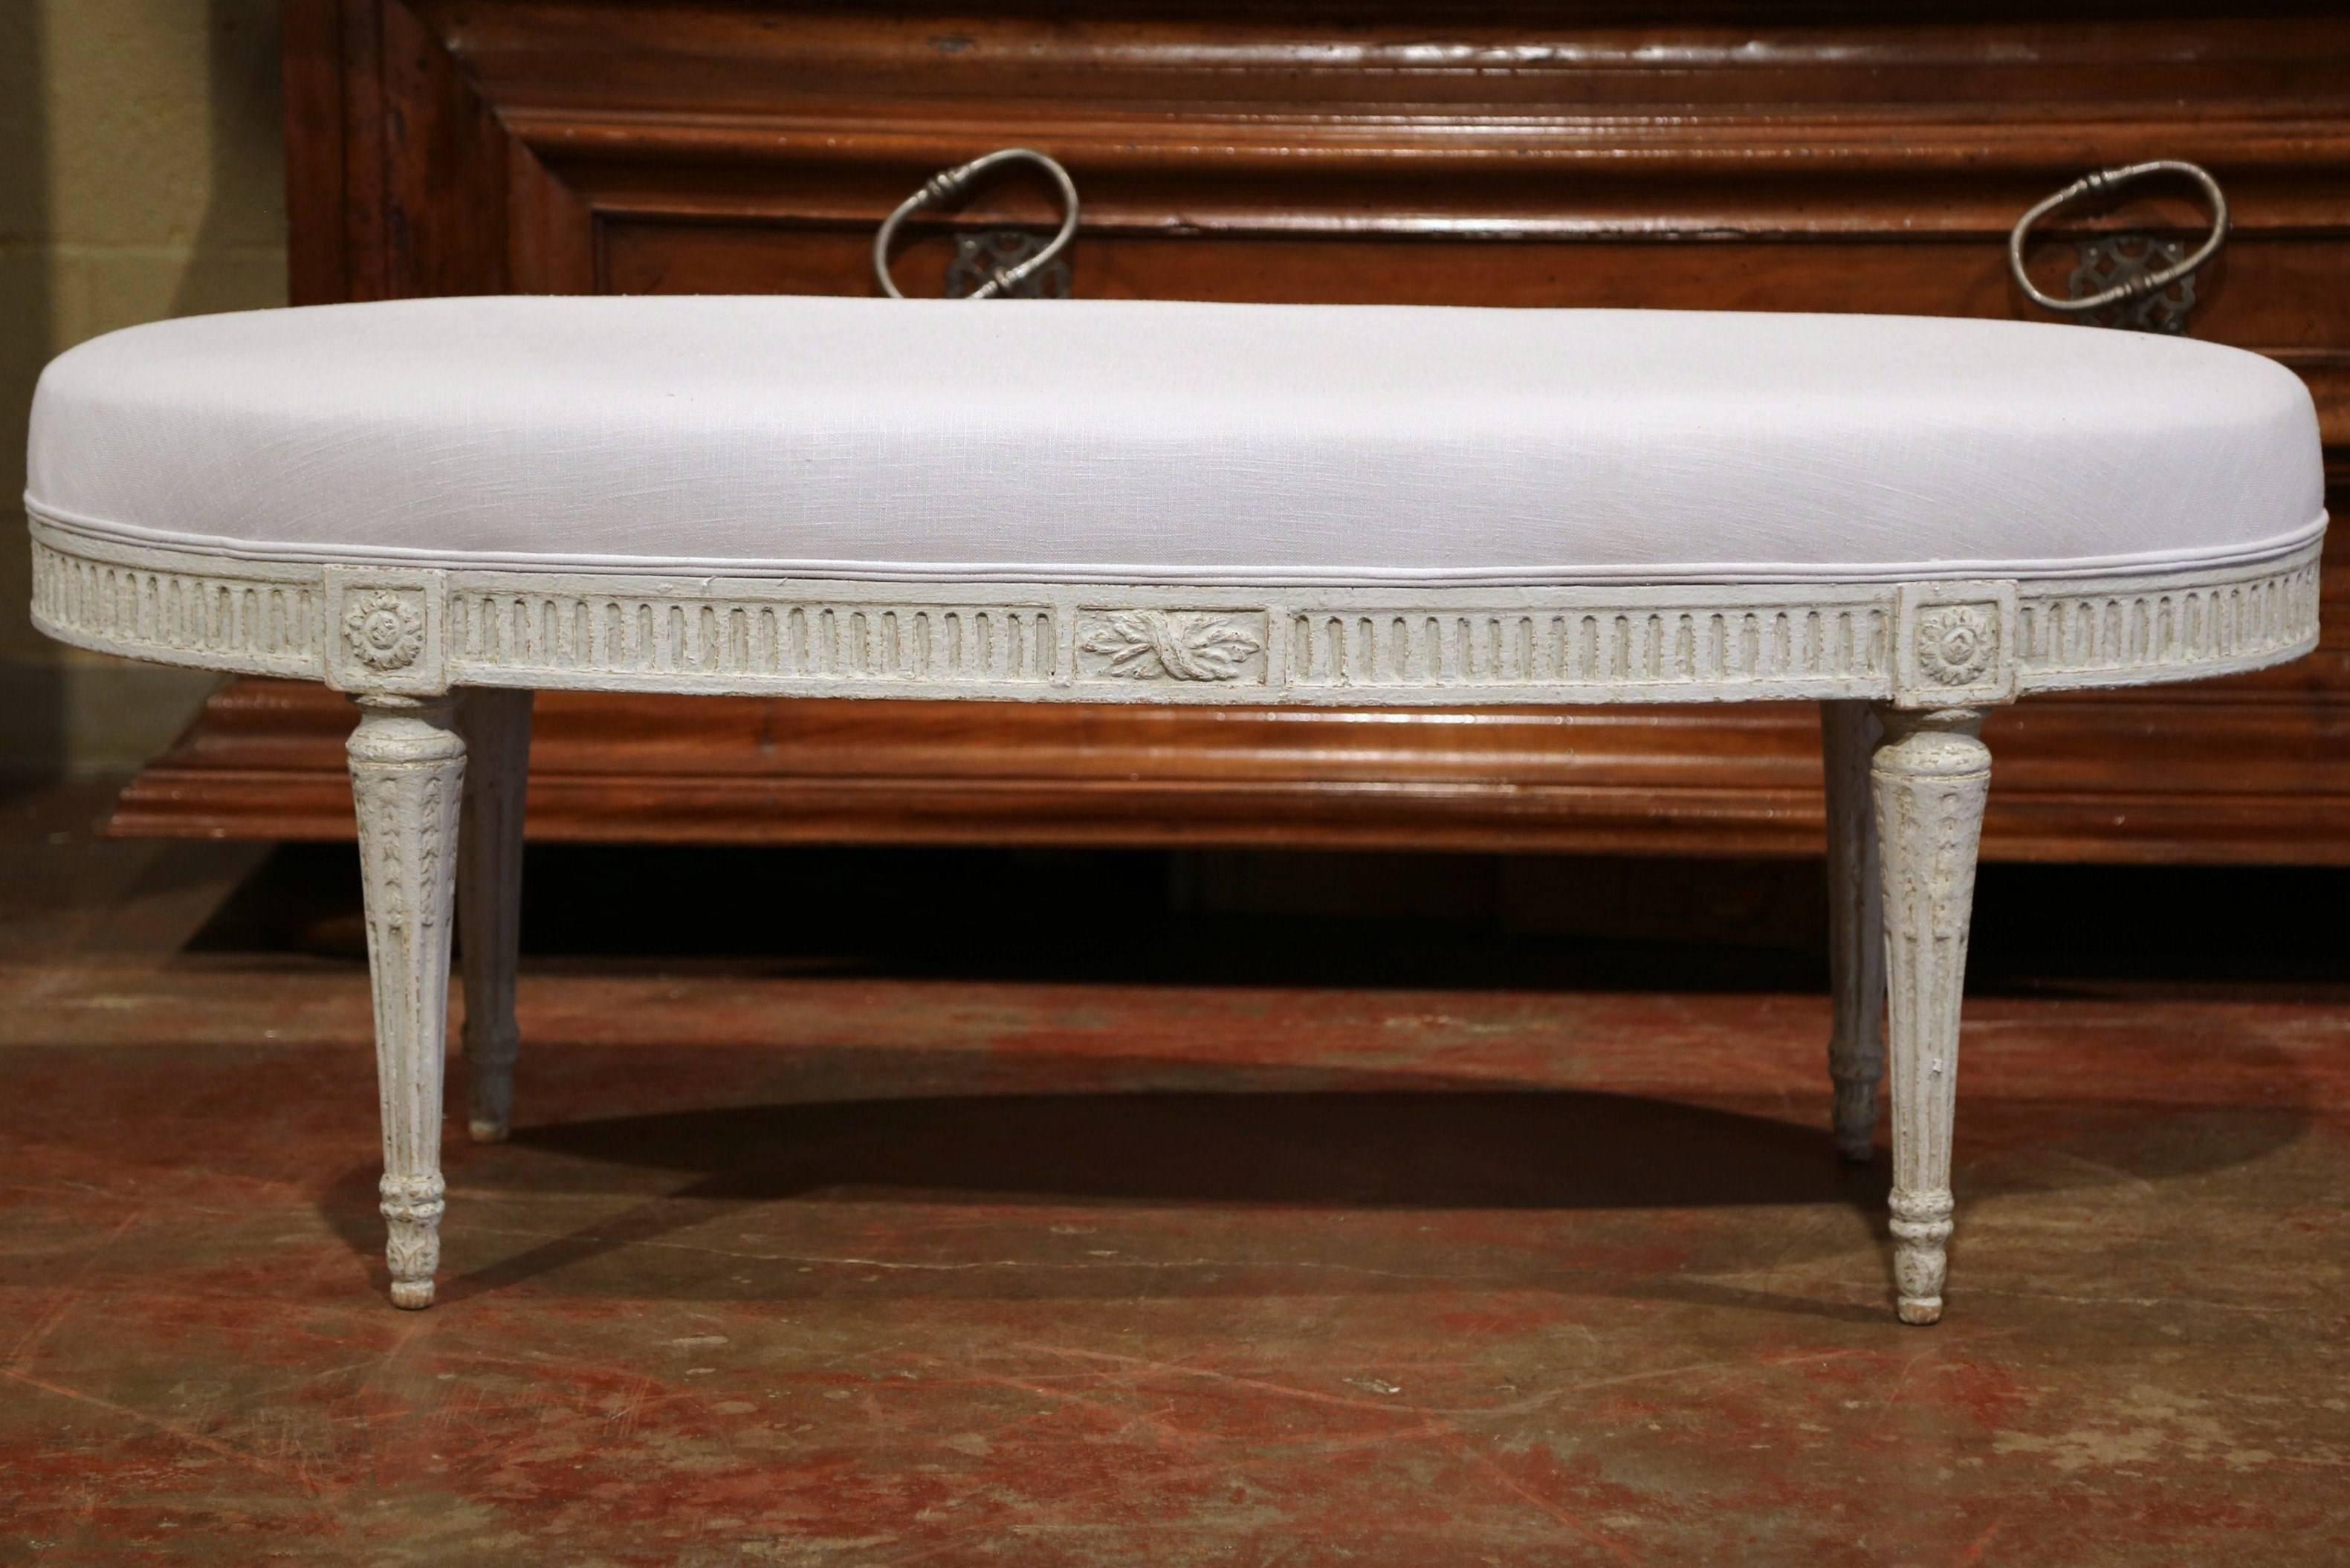 Complete your entryway, living room or bedroom with this grey painted bench from France, created circa 1890. Oval in shape, the antique features a carved design around the apron, which includes flower medallions and four fluted legs. The classic